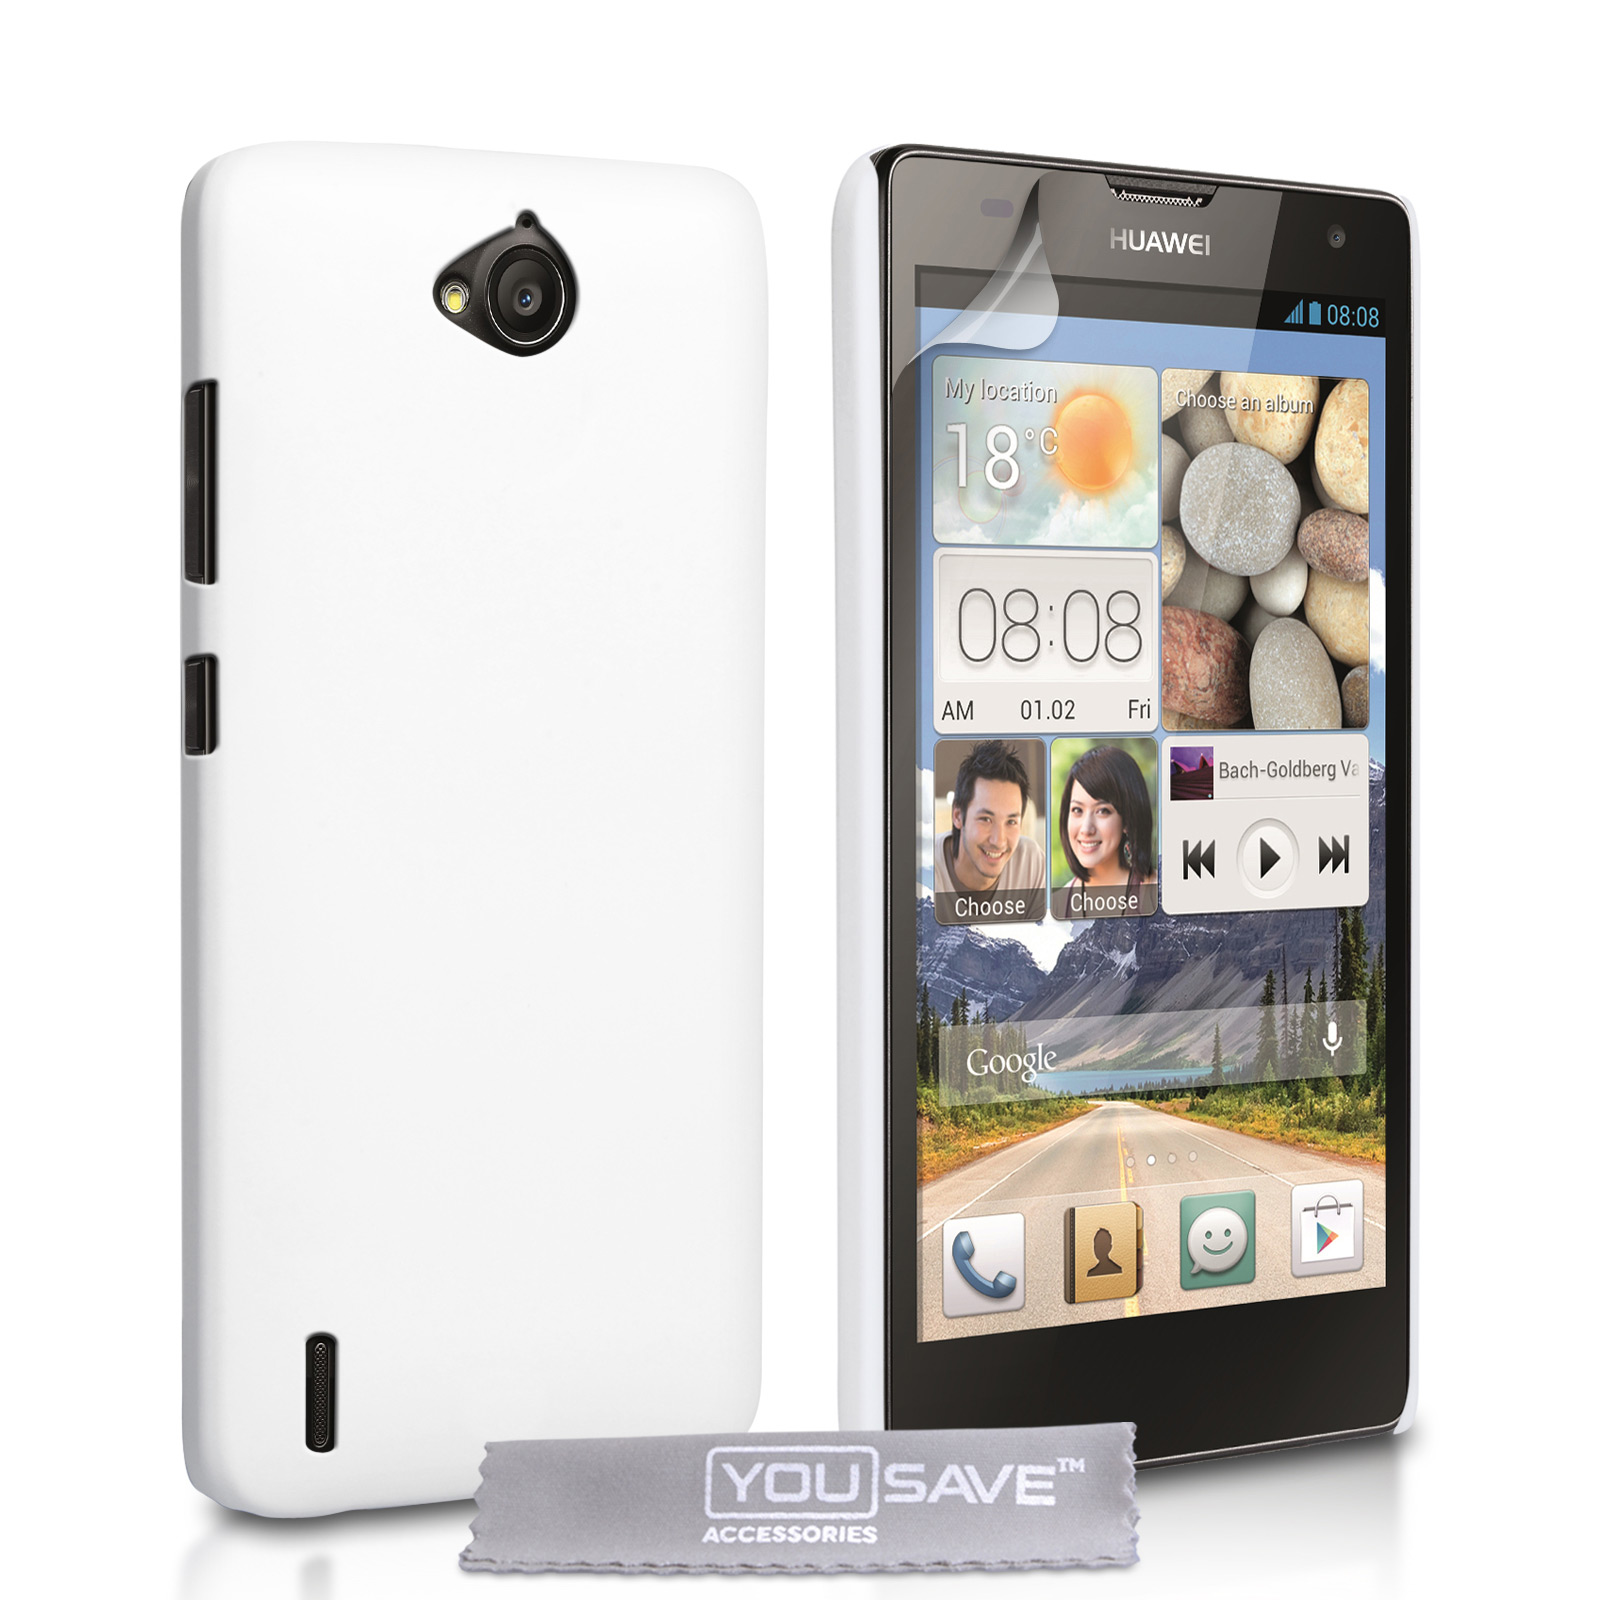 YouSave Accessories Huawei Ascend G740 Hard Hybrid Case - White